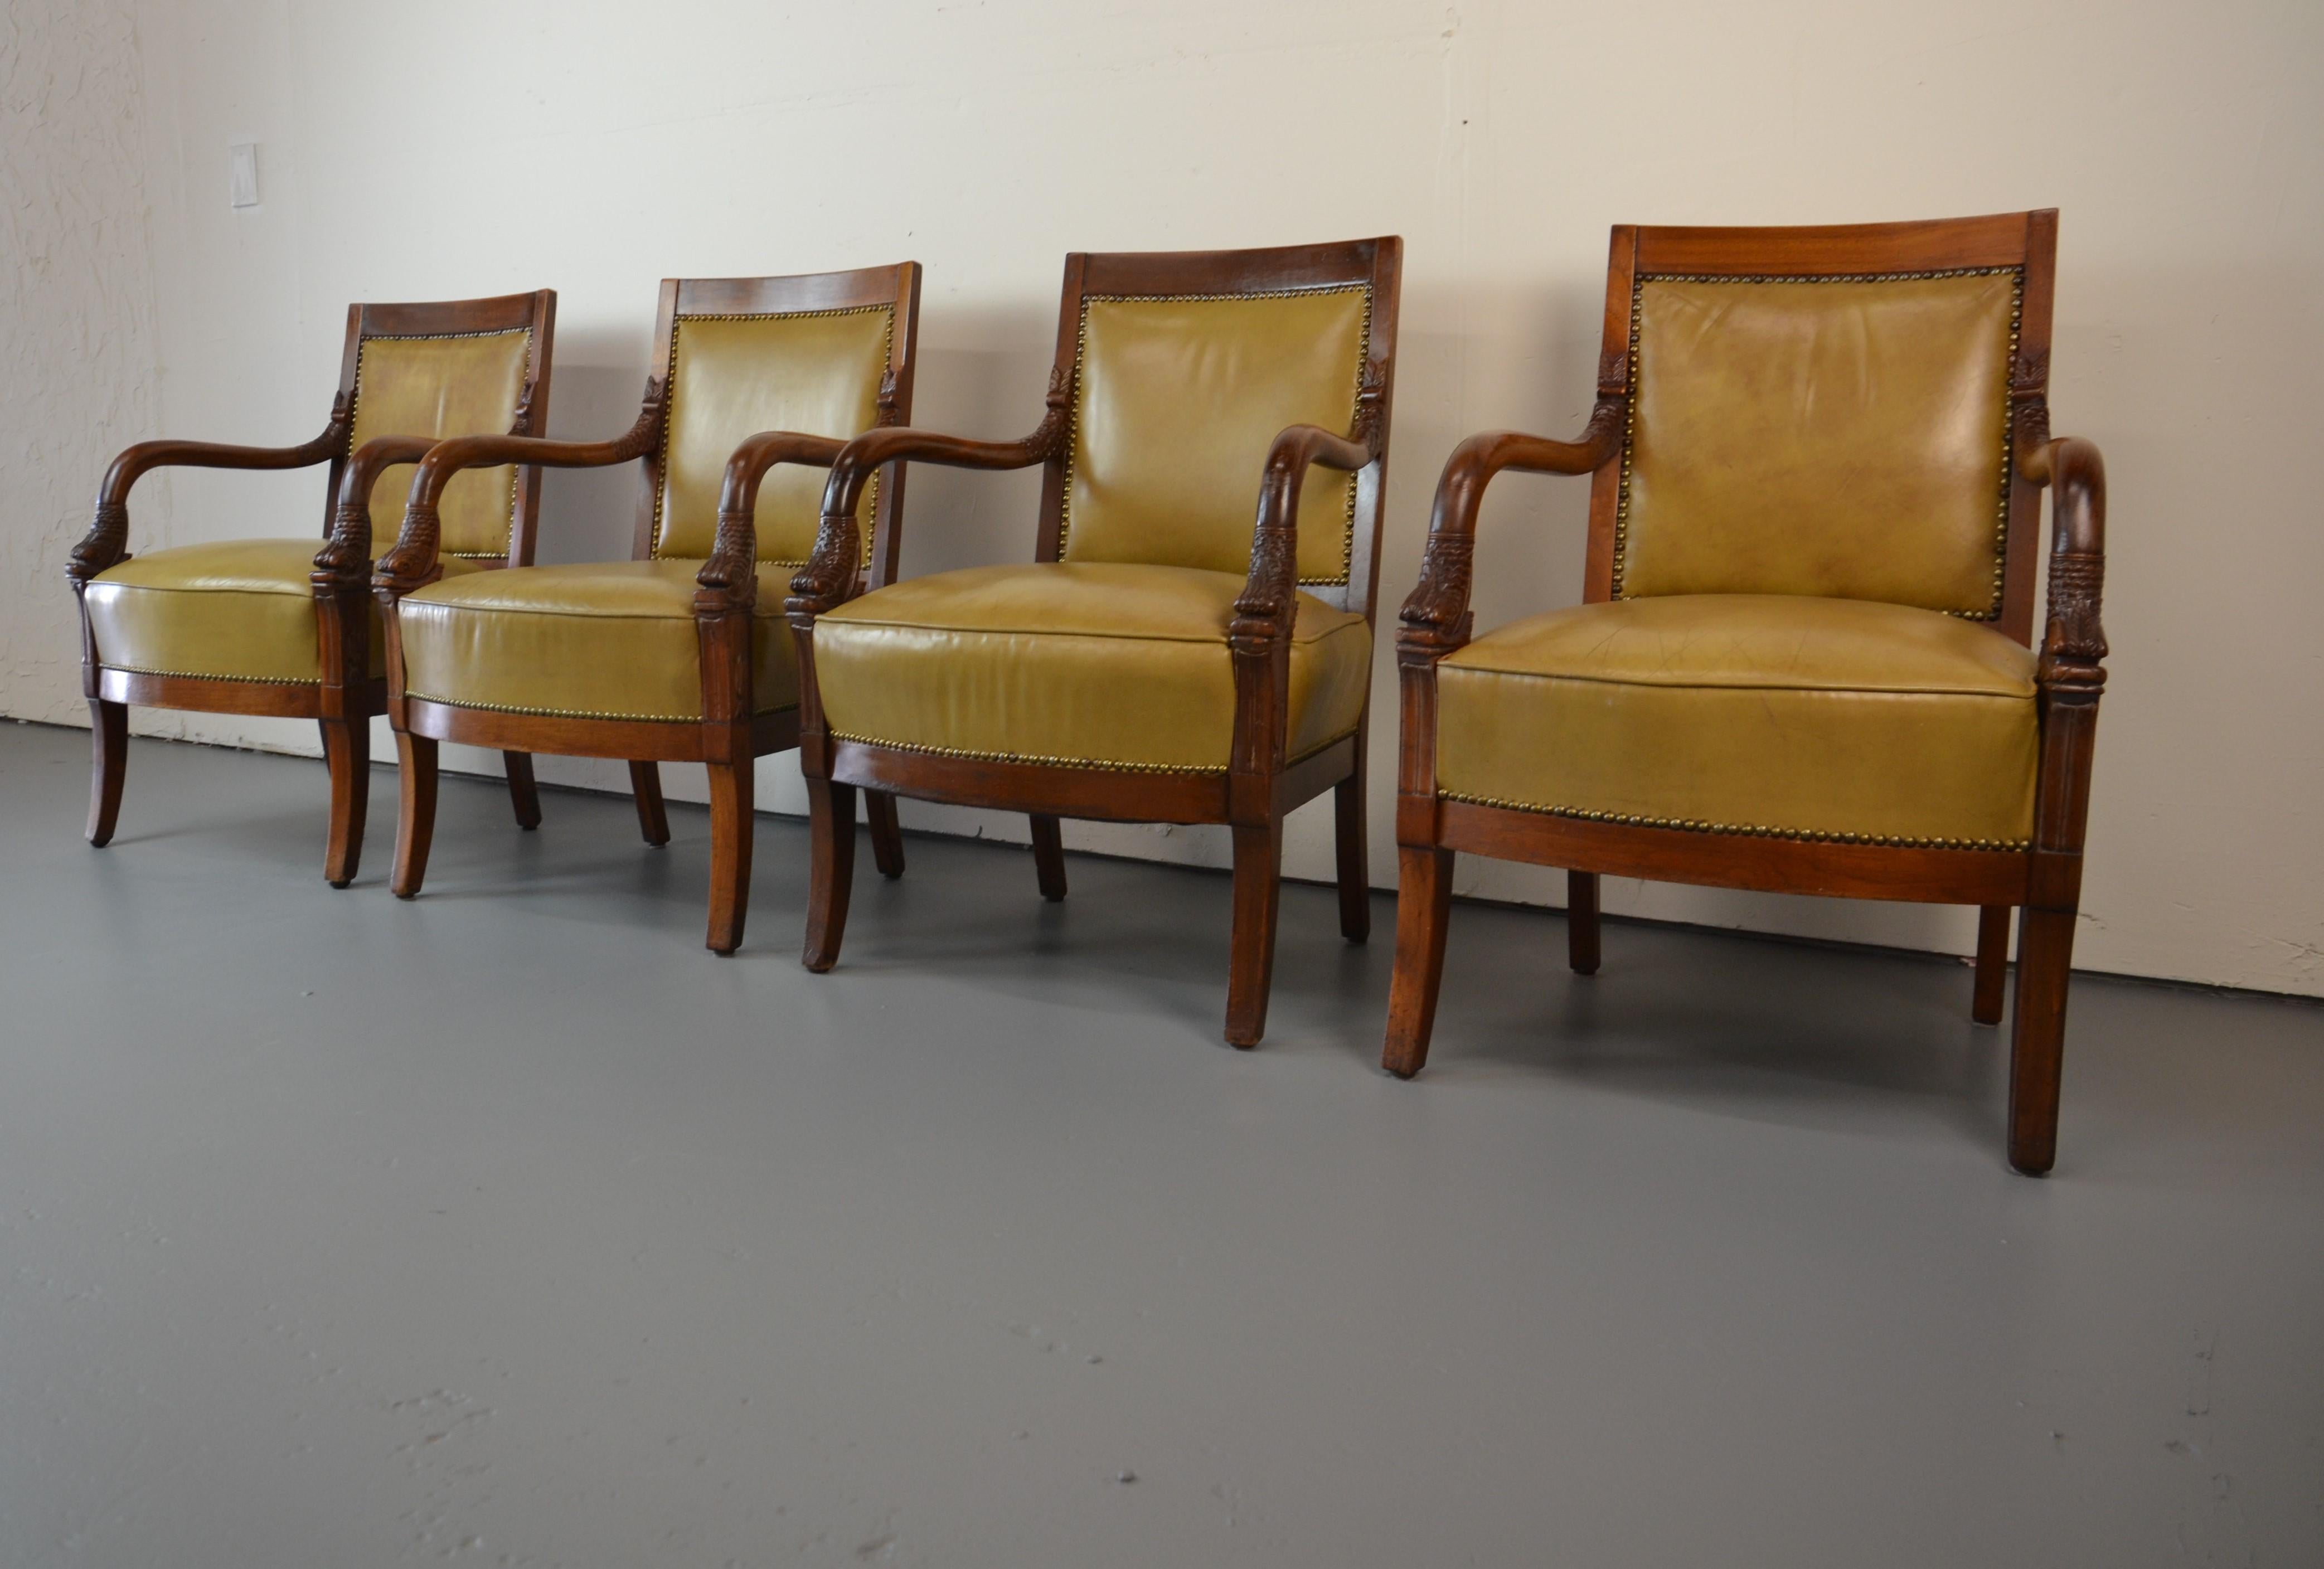 French Empire-style Napoleonic arm chairs. Carved Dolphin head arms. Leather upholstered. Demotion arm 26.50